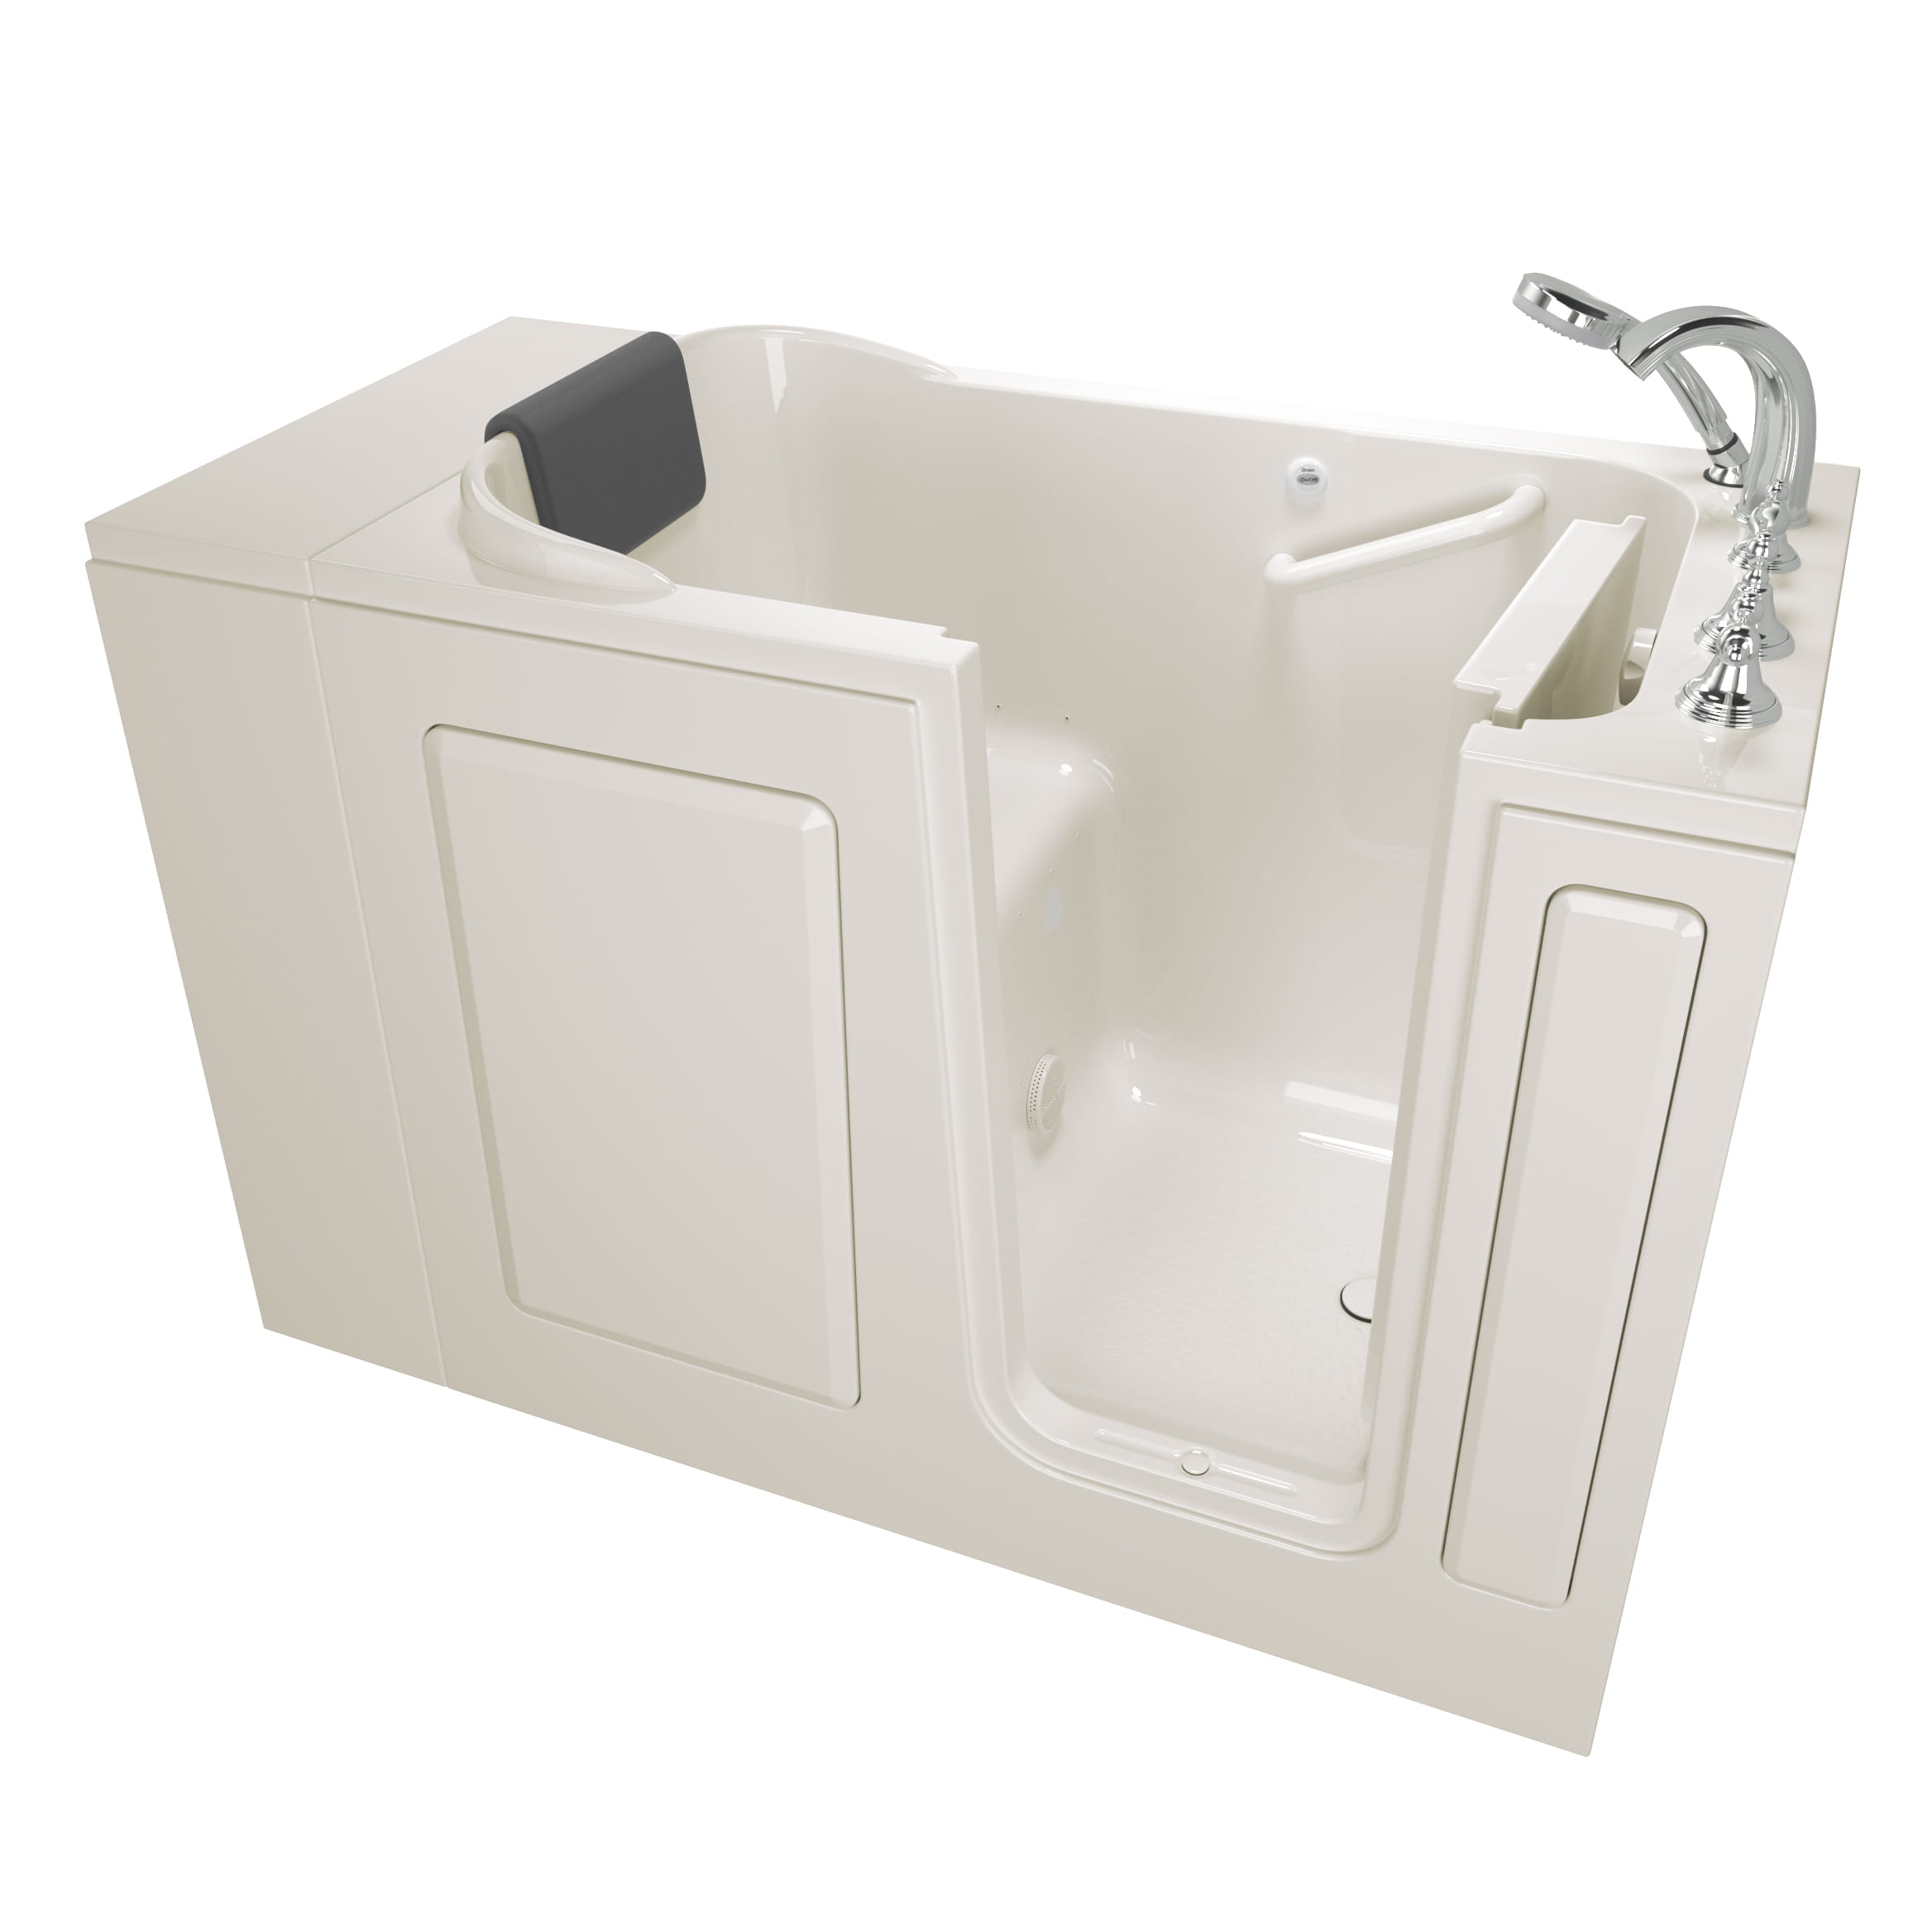 Gelcoat Premium Series 28 x 48 Inch Walk in Tub With Soaker System   Right Hand Drain With Faucet WIB LINEN